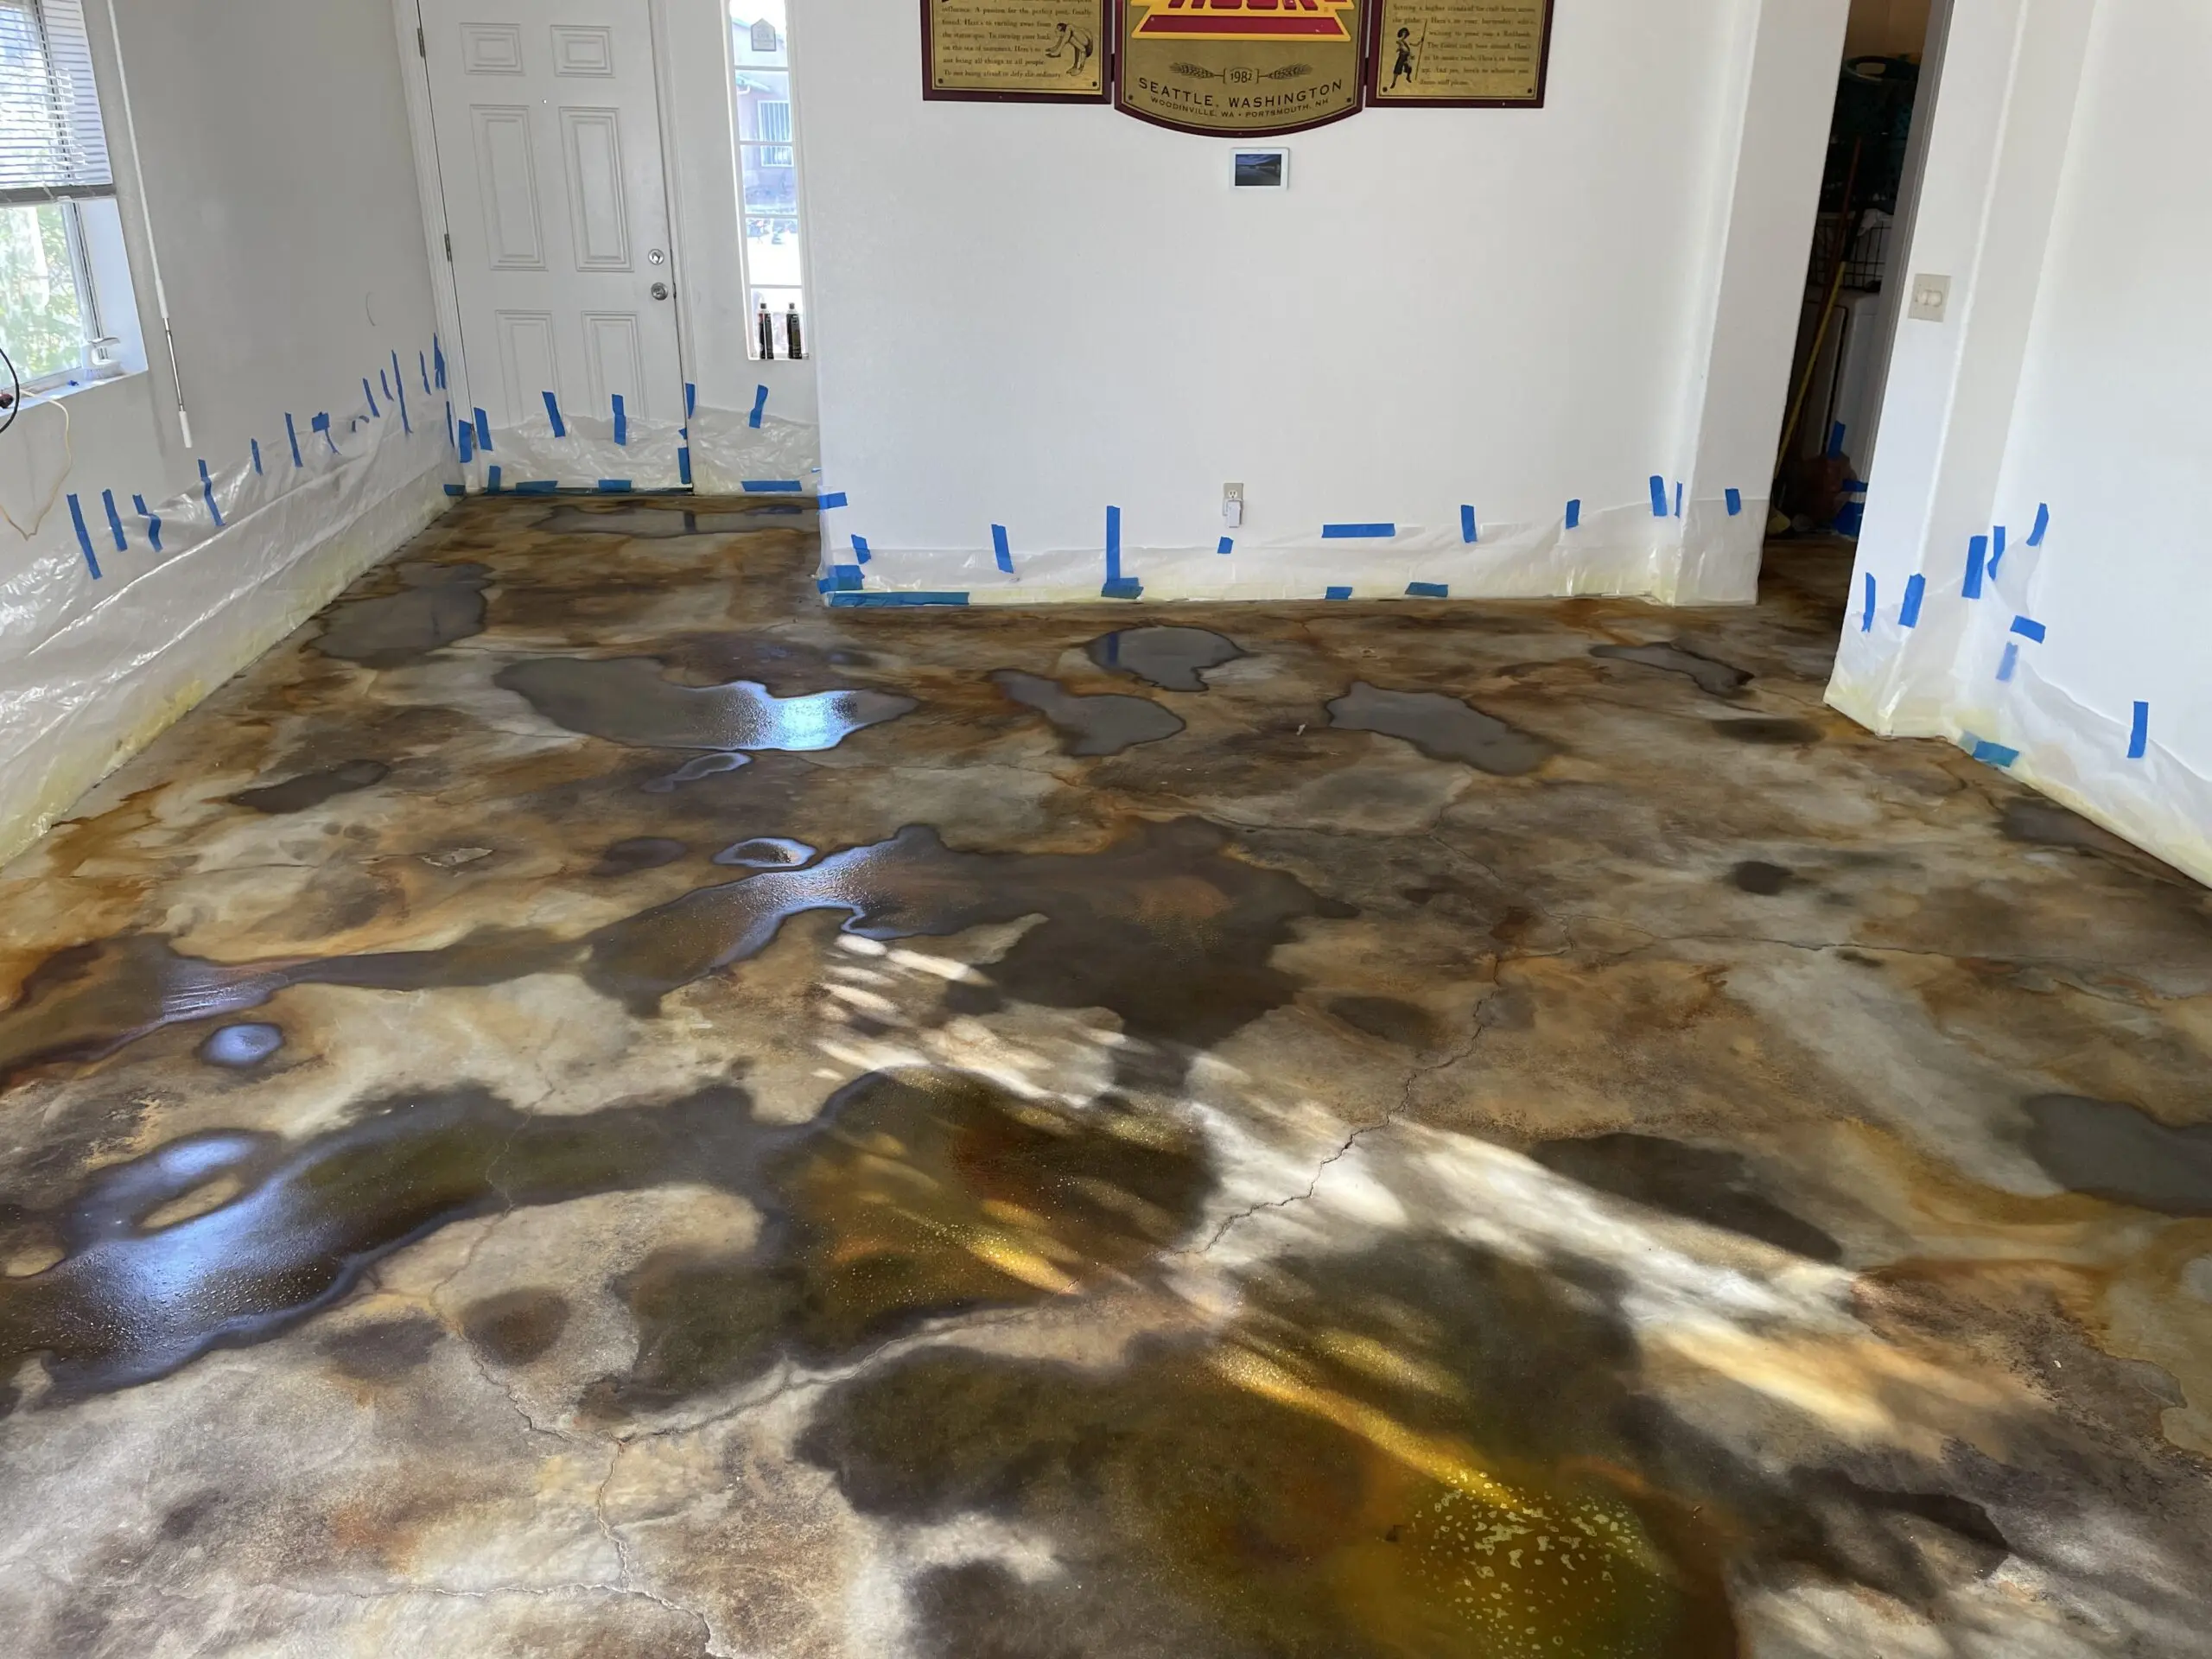 A photo showing the living room floor post-application of the Black, Malayan Buff, and Seagrass EverStain acid stains